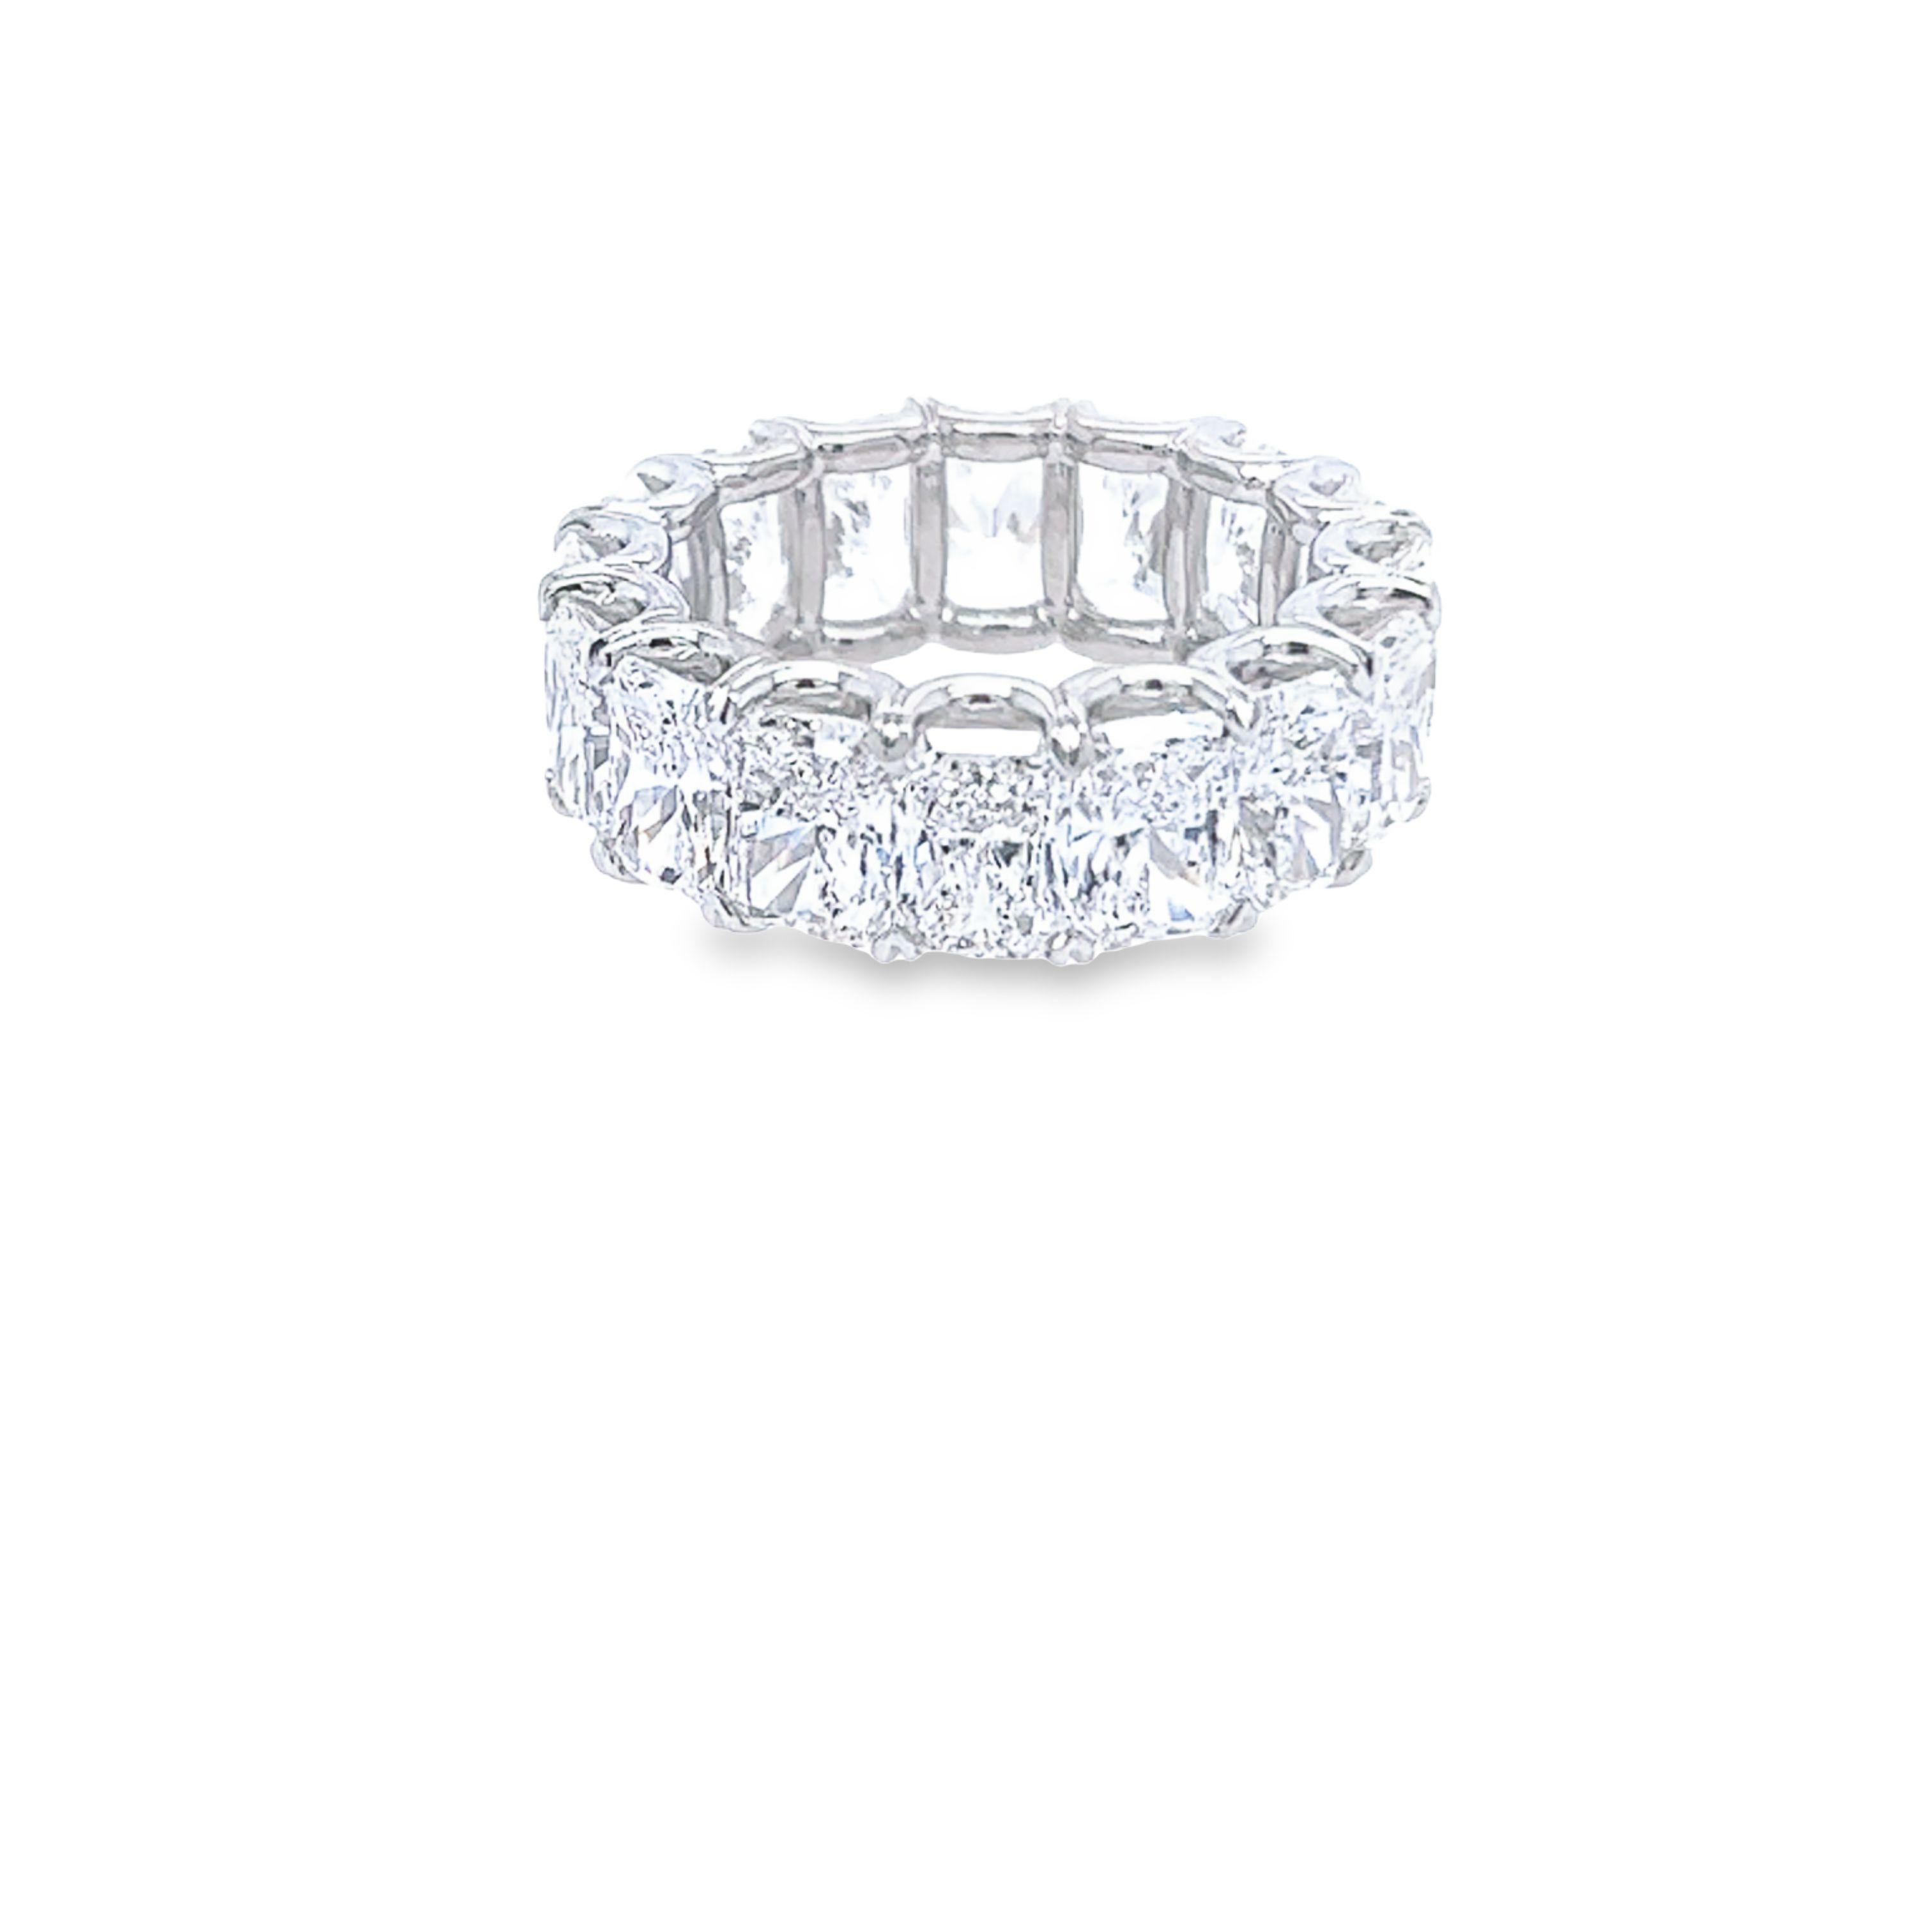 Rosenberg Diamonds & Co. 11.31 total carat weight Radiant cut diamond eternity band. This beautiful platinum eternity band has sixteen elongated radiant cut diamonds ranging from E-G in color SI1-VS in clarity with an average of just under a carat